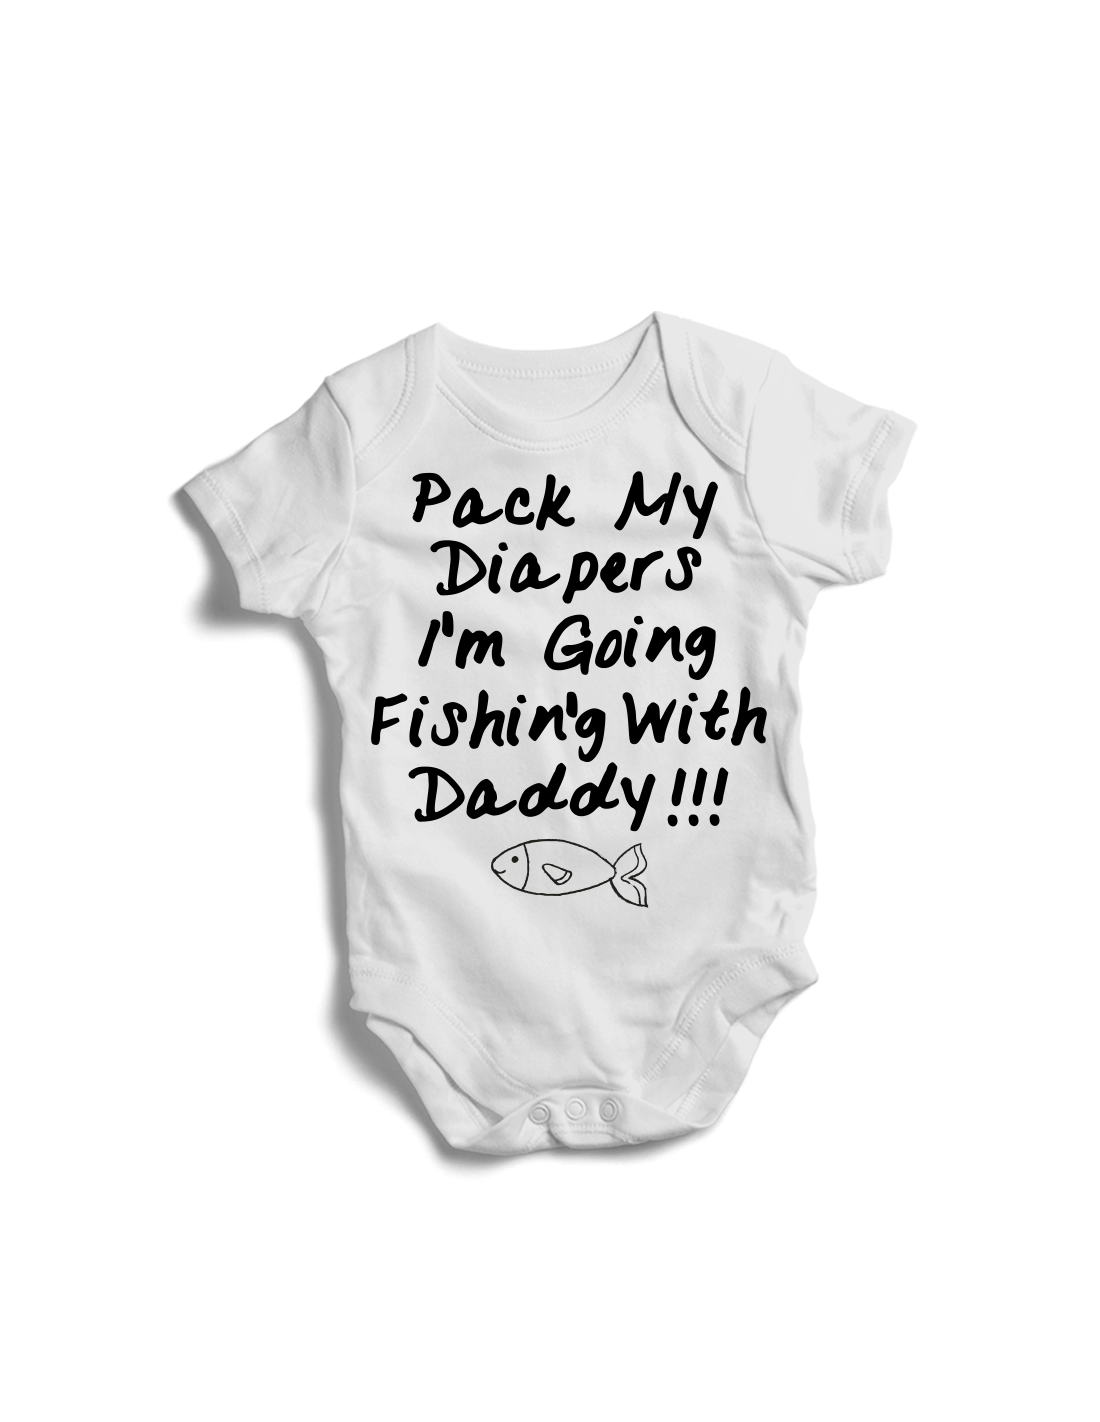 Pack My Diapers I'm Going Fishing With Daddy Onesie